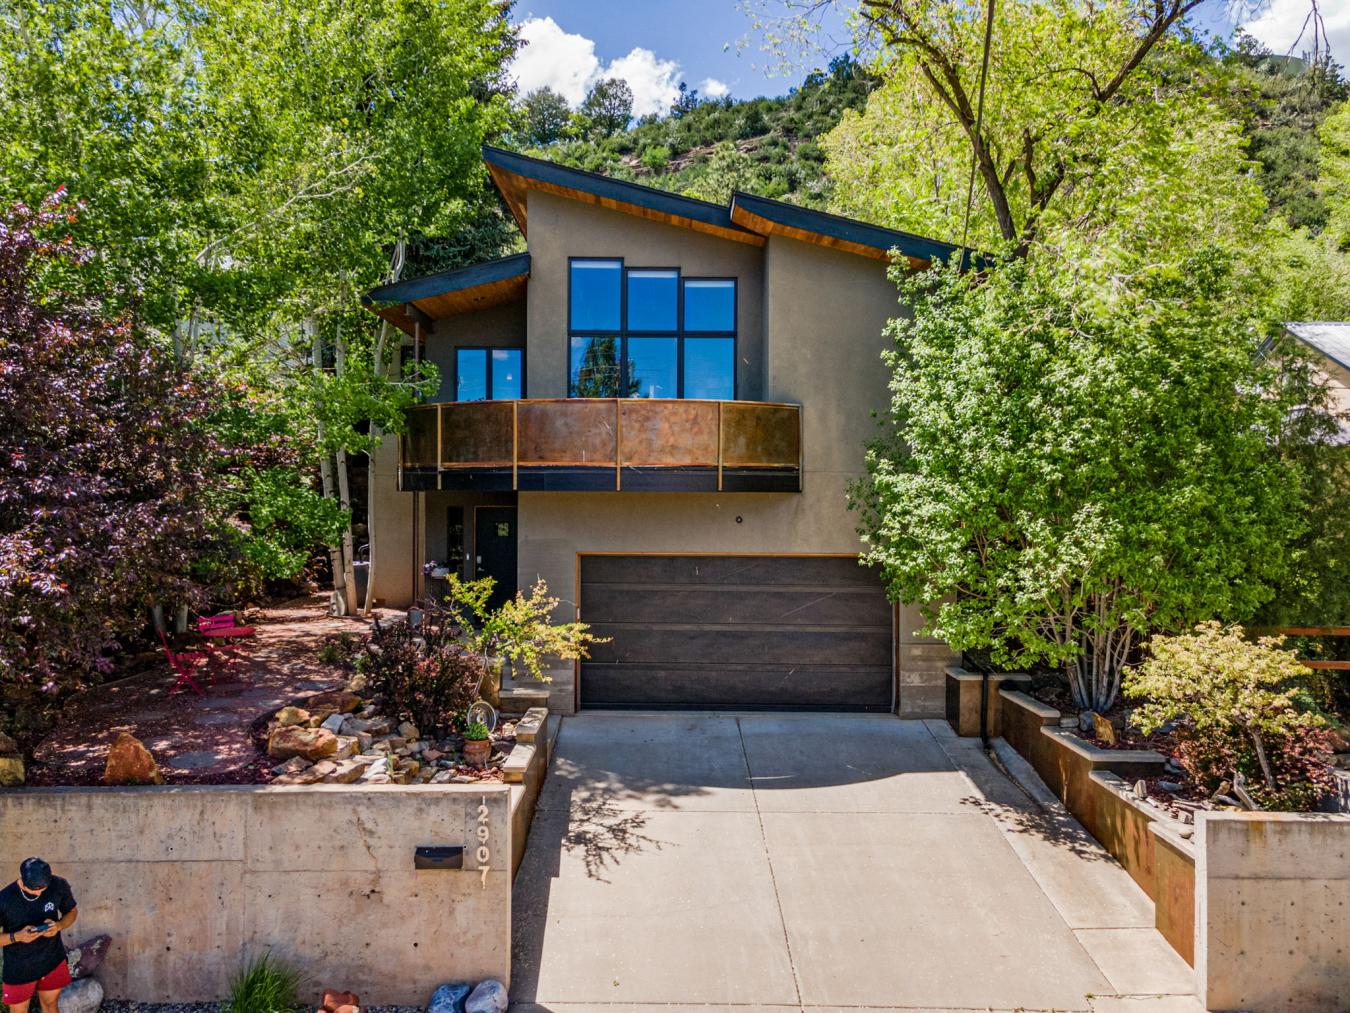 2907 West 3rd, Durango, Colorado, 81301, United States, 4 Bedrooms Bedrooms, ,3 BathroomsBathrooms,Residential,For Sale,2907 West 3rd,1277783